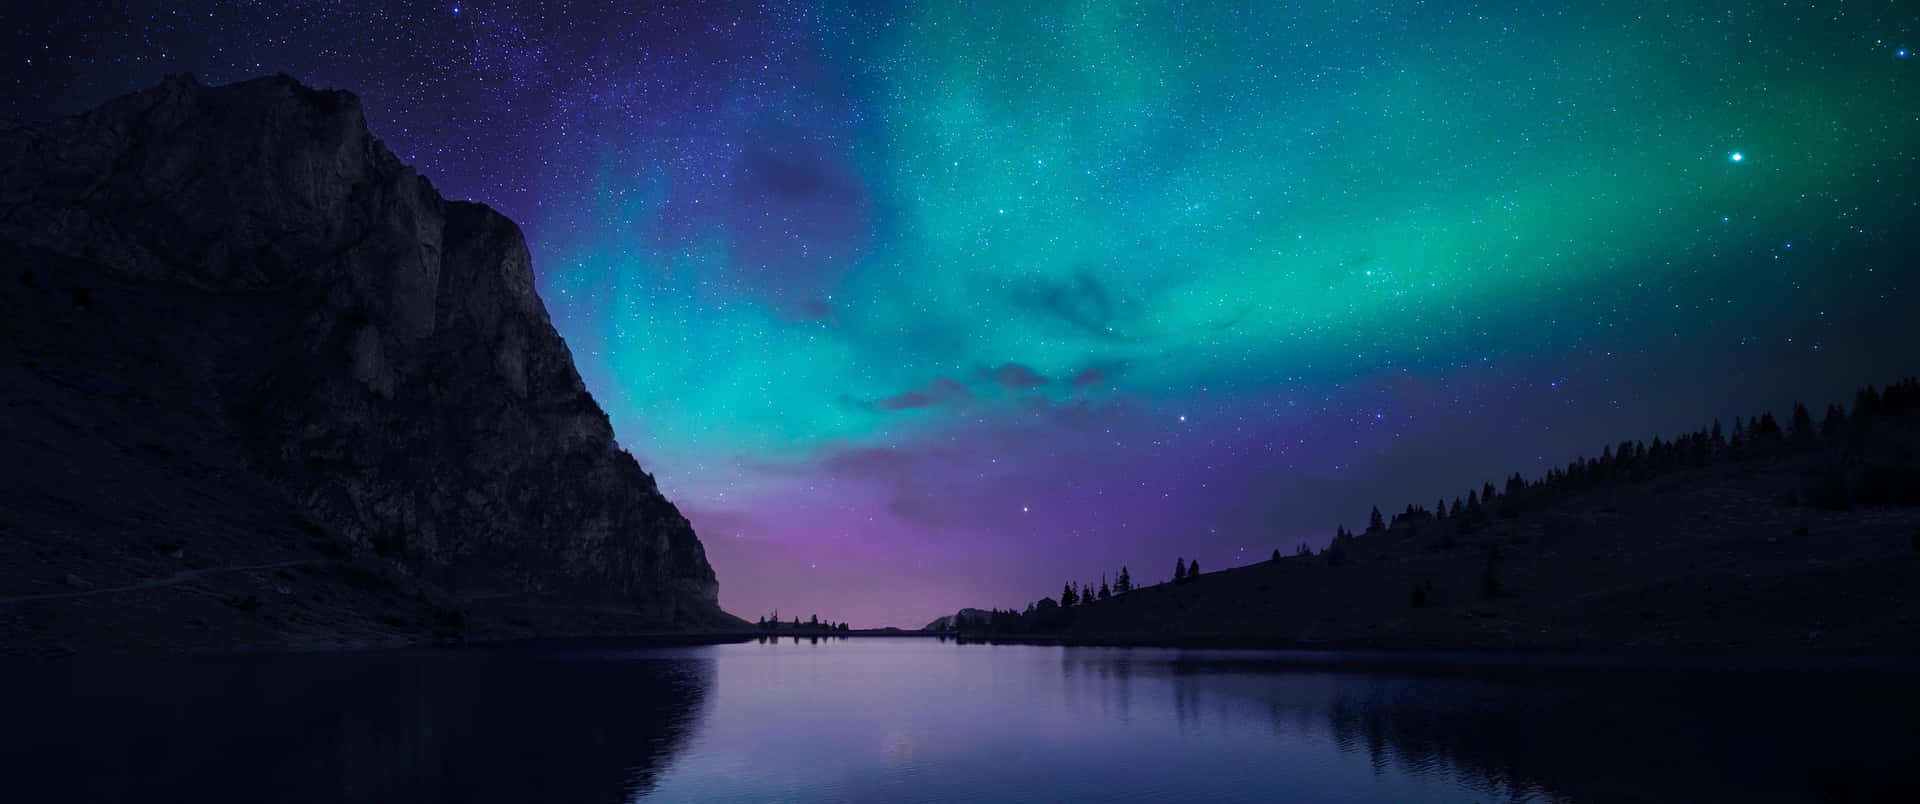 3440x1440 Space Northern Lights And Mountains Wallpaper